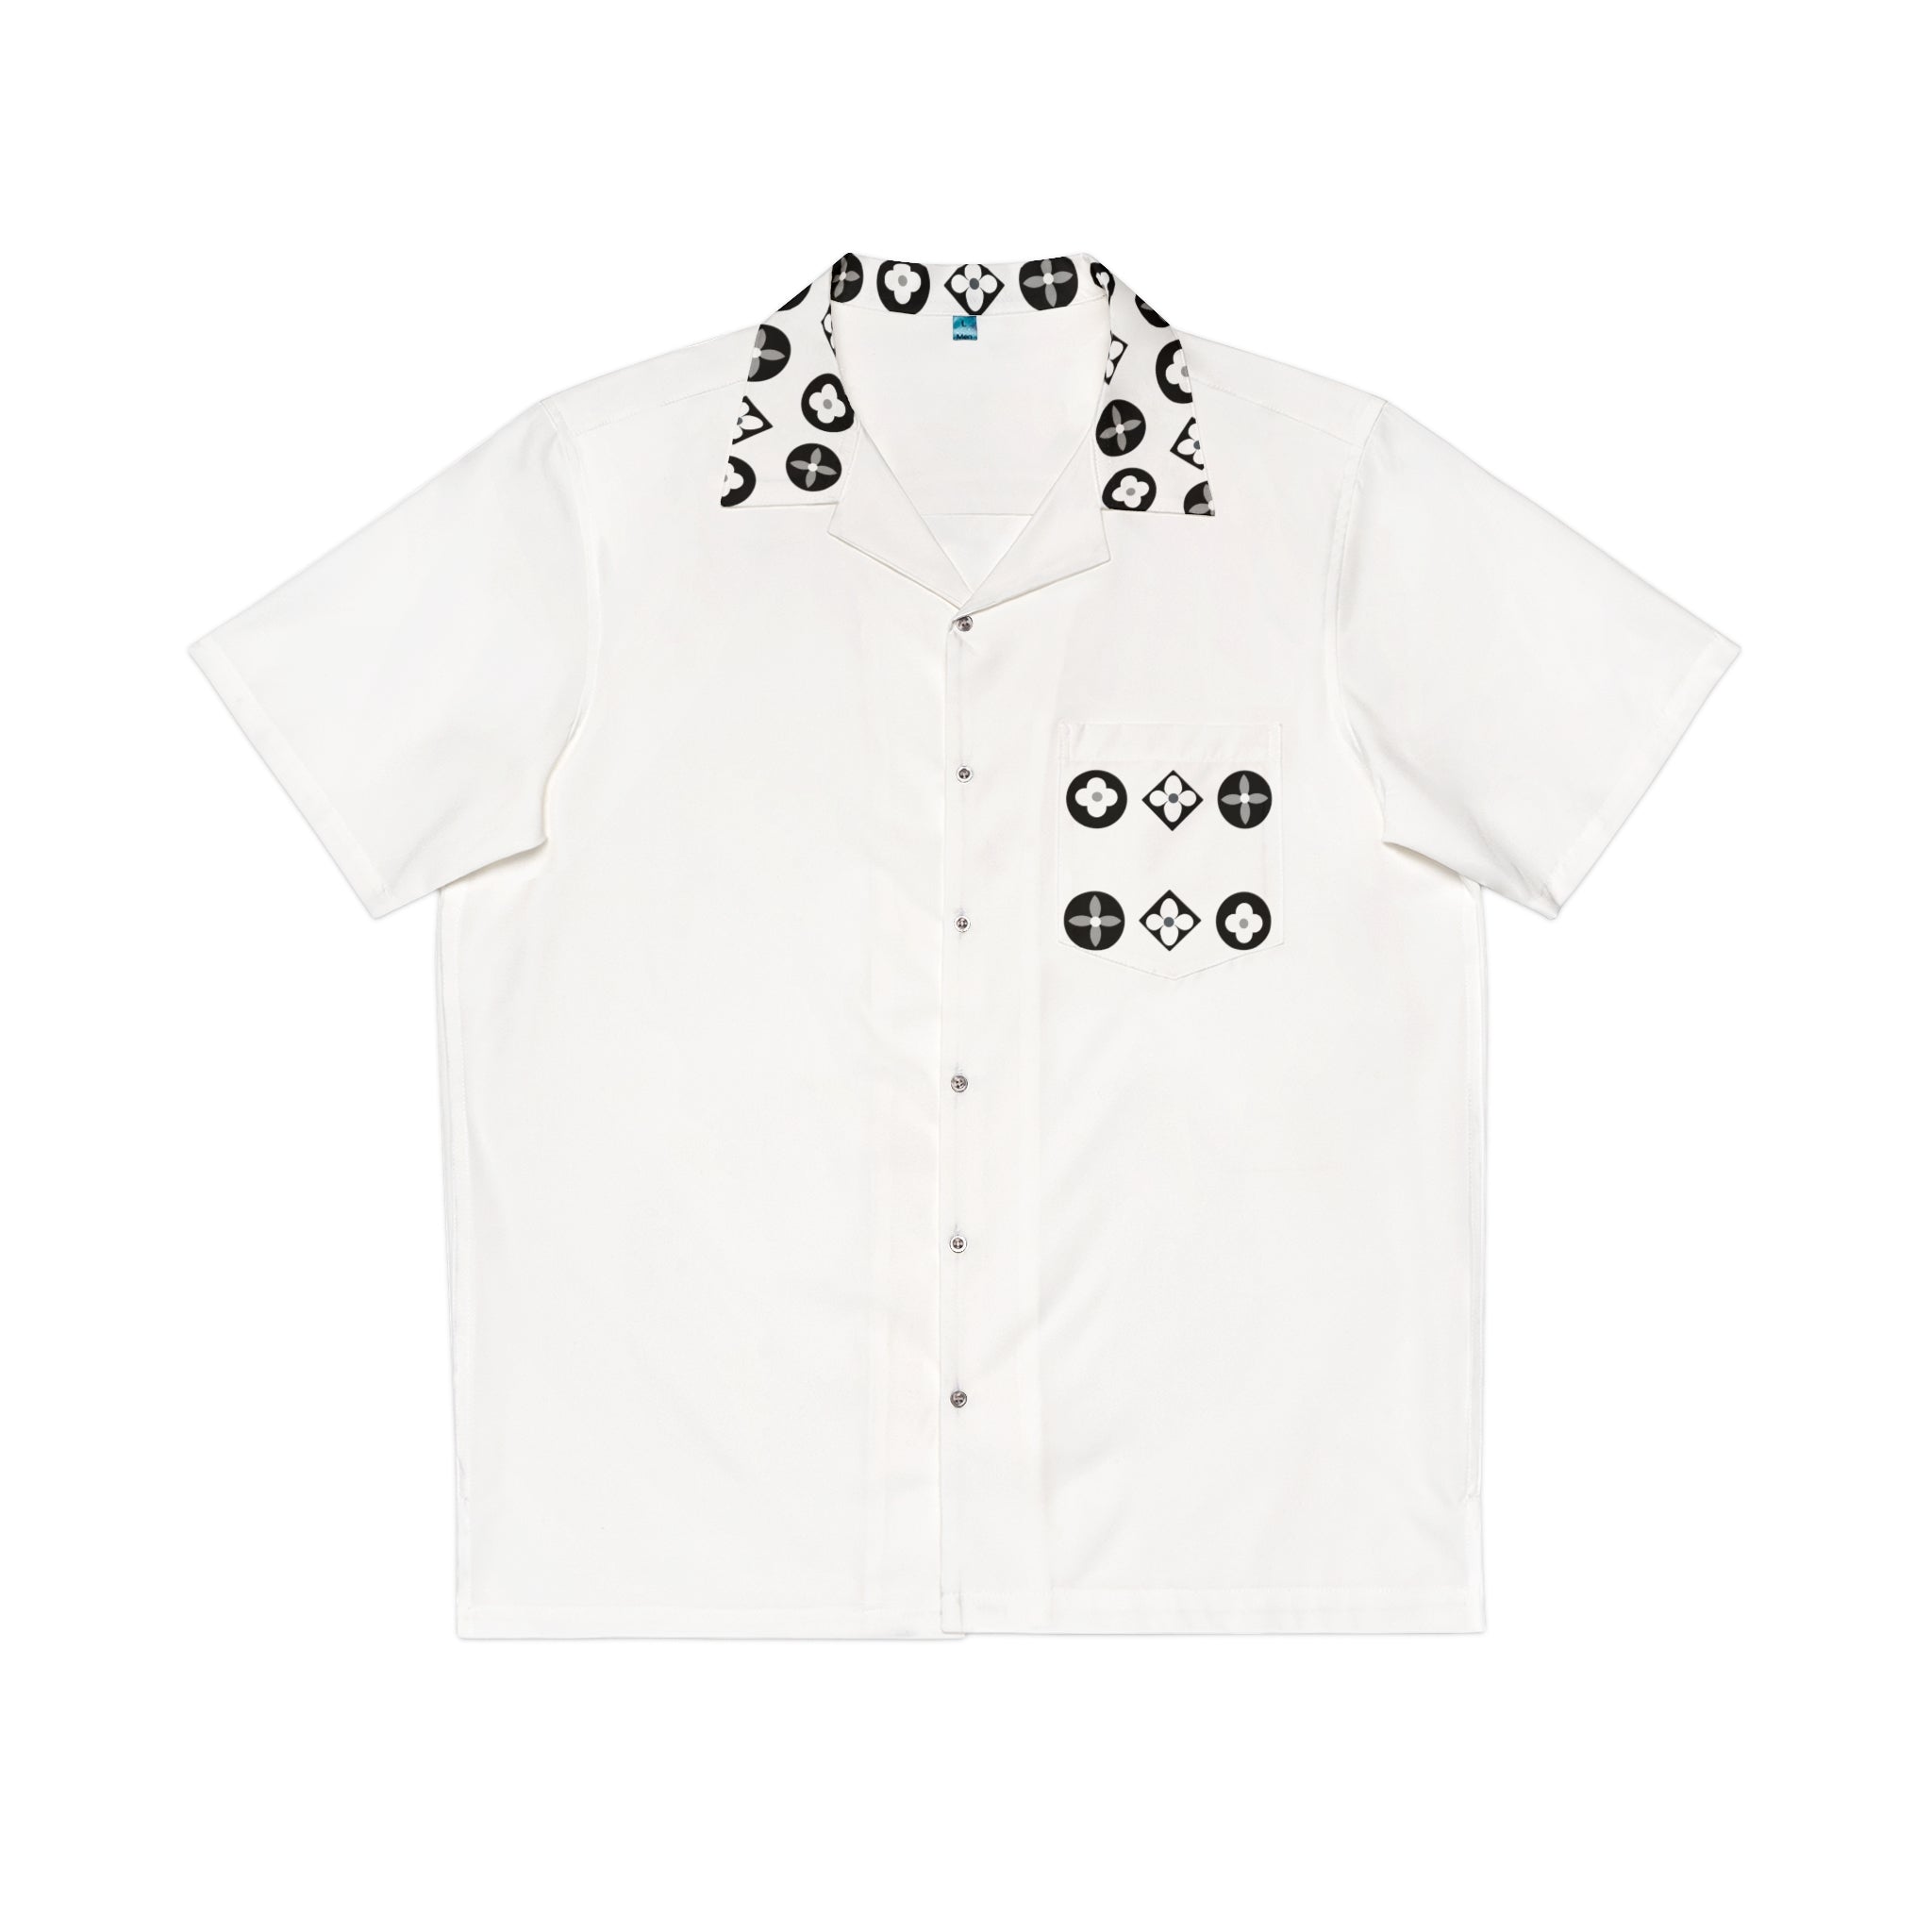  Groove Collection Trilogy of Icons Pocket Grid (Black, White) White Unisex Gender Neutral Button Up Shirt, Hawaiian Shirt Shirts5XLWhite